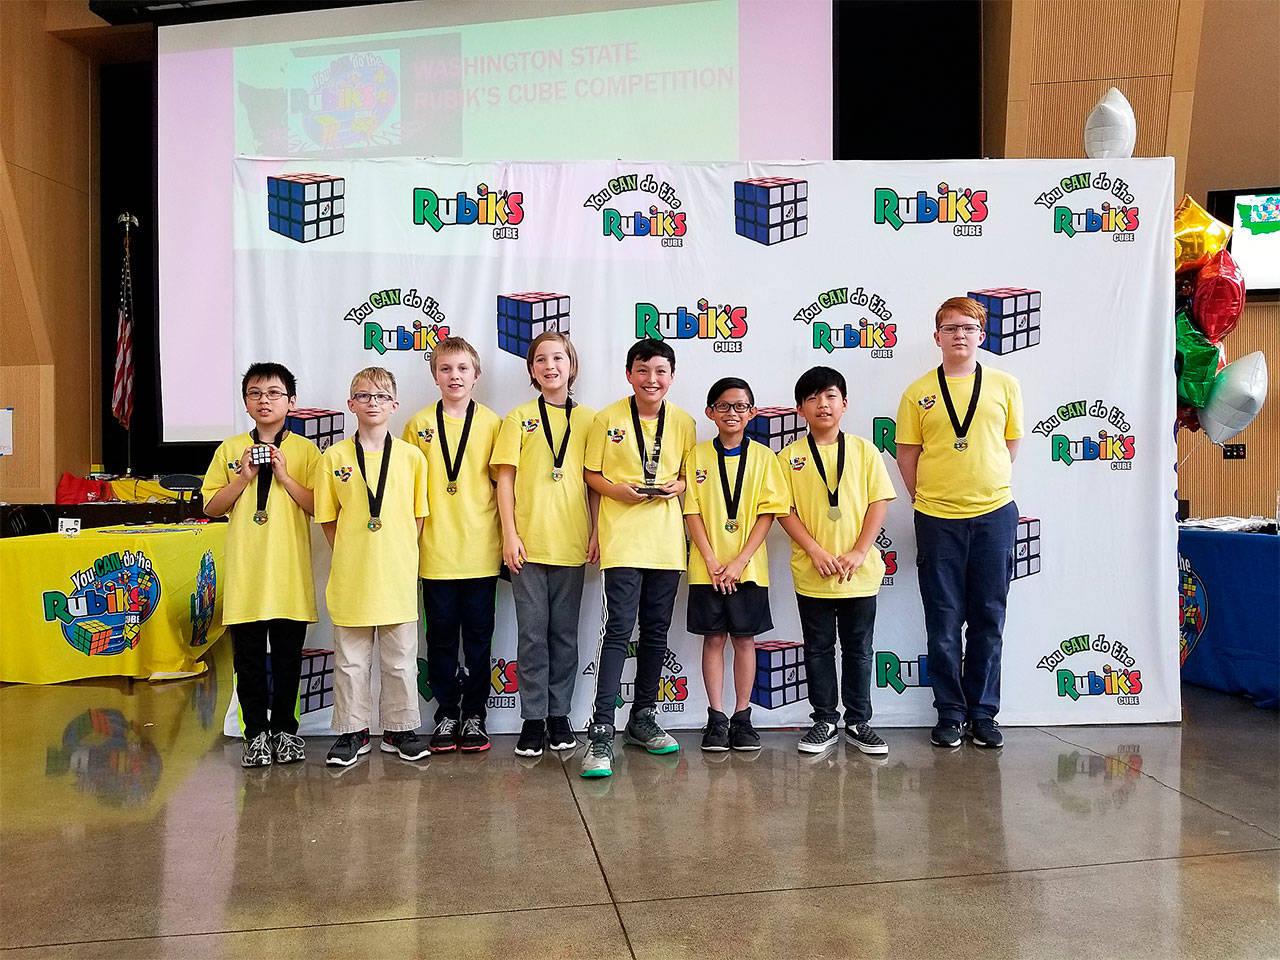 Forest View Elementary School ranks No. 1 in the state and No. 2 in the nation in the You Can Do the Rubik’s Cube Speed League. (Contributed photo)